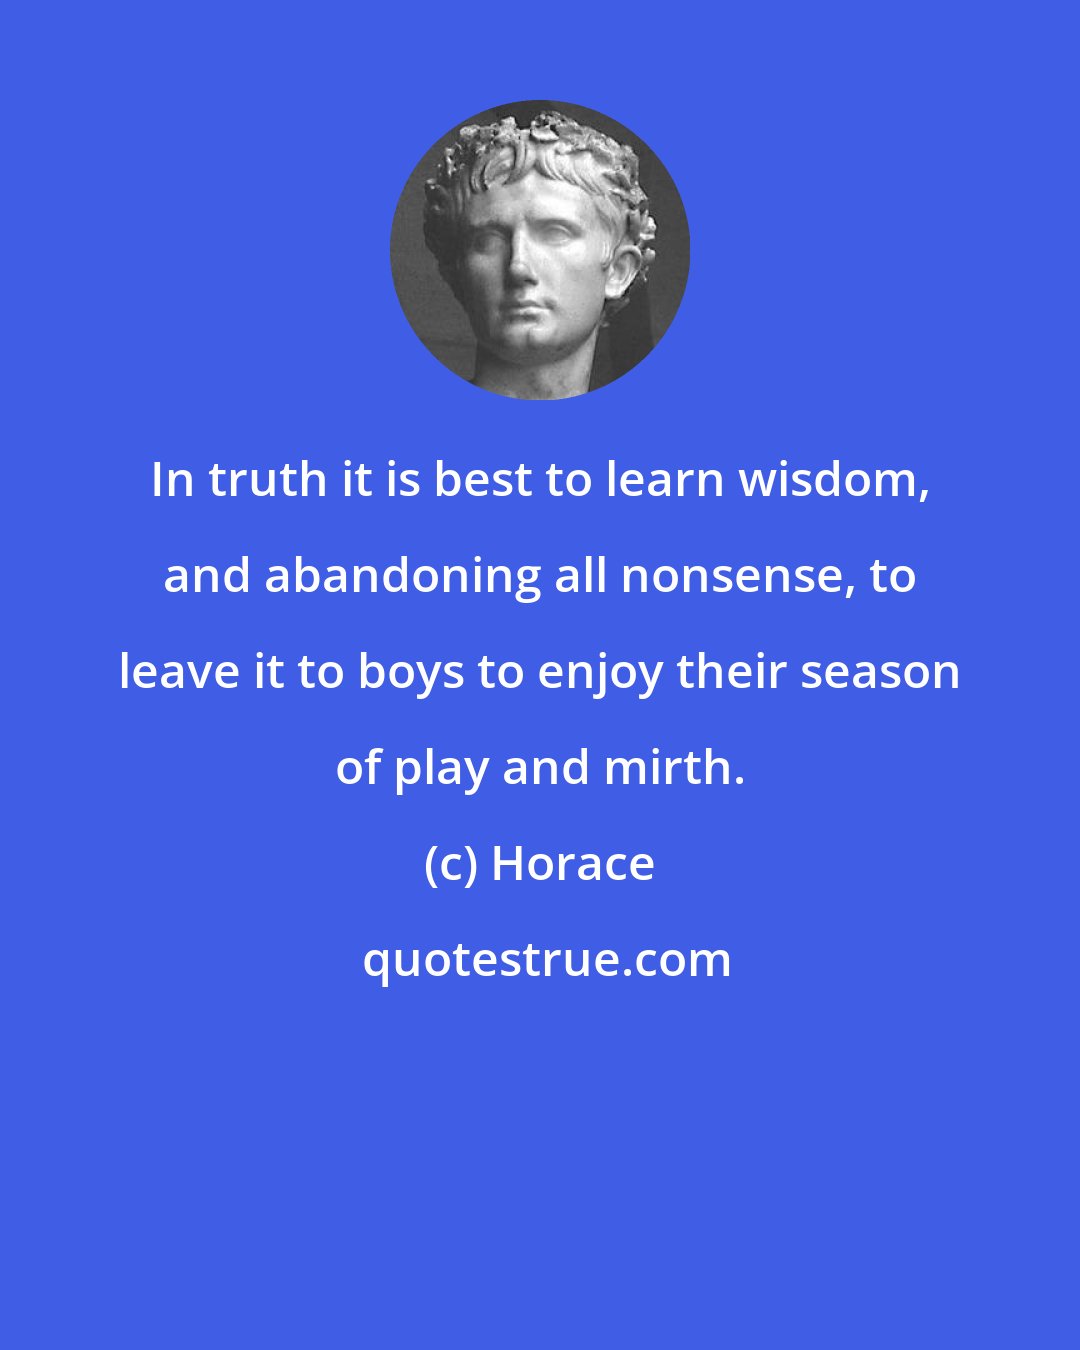 Horace: In truth it is best to learn wisdom, and abandoning all nonsense, to leave it to boys to enjoy their season of play and mirth.